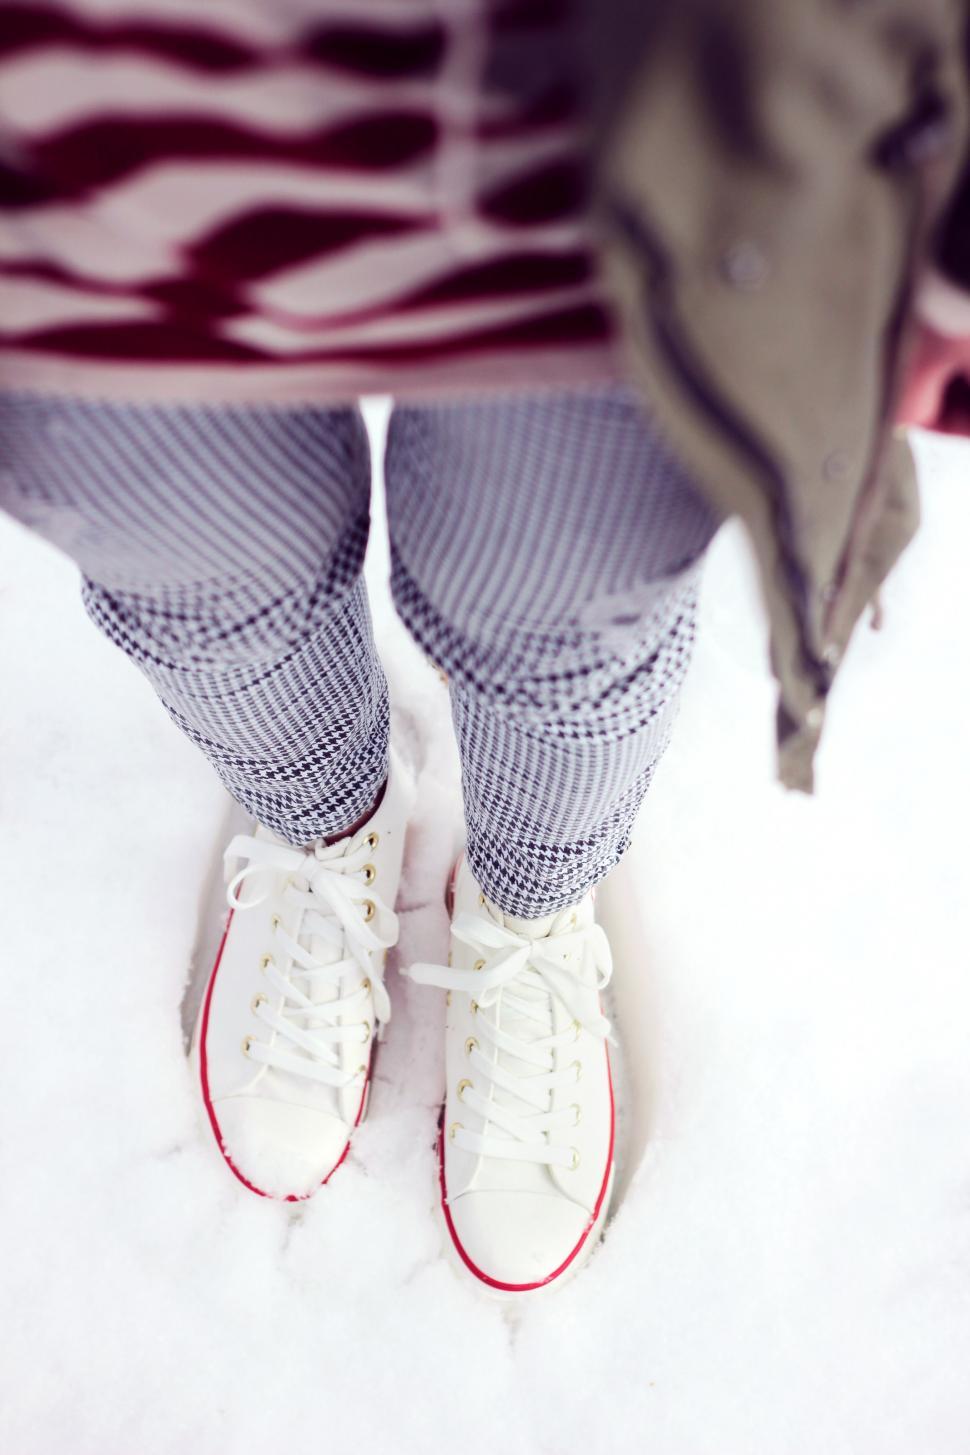 Free Image of Person Standing in Snow With White Tennis Shoes 